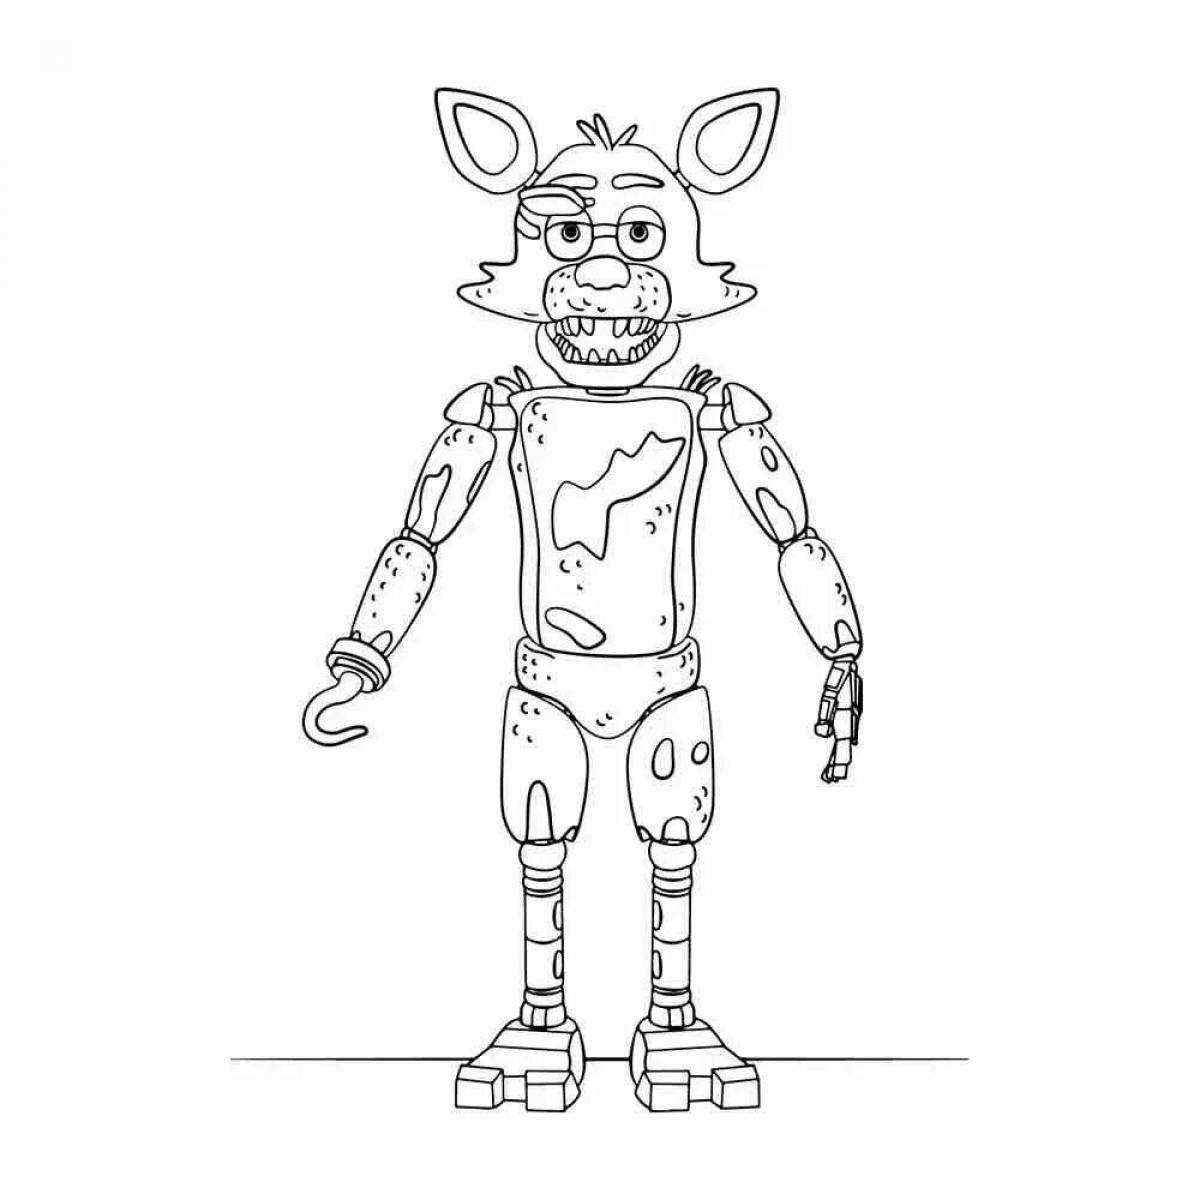 Sweet official fnaf coloring page